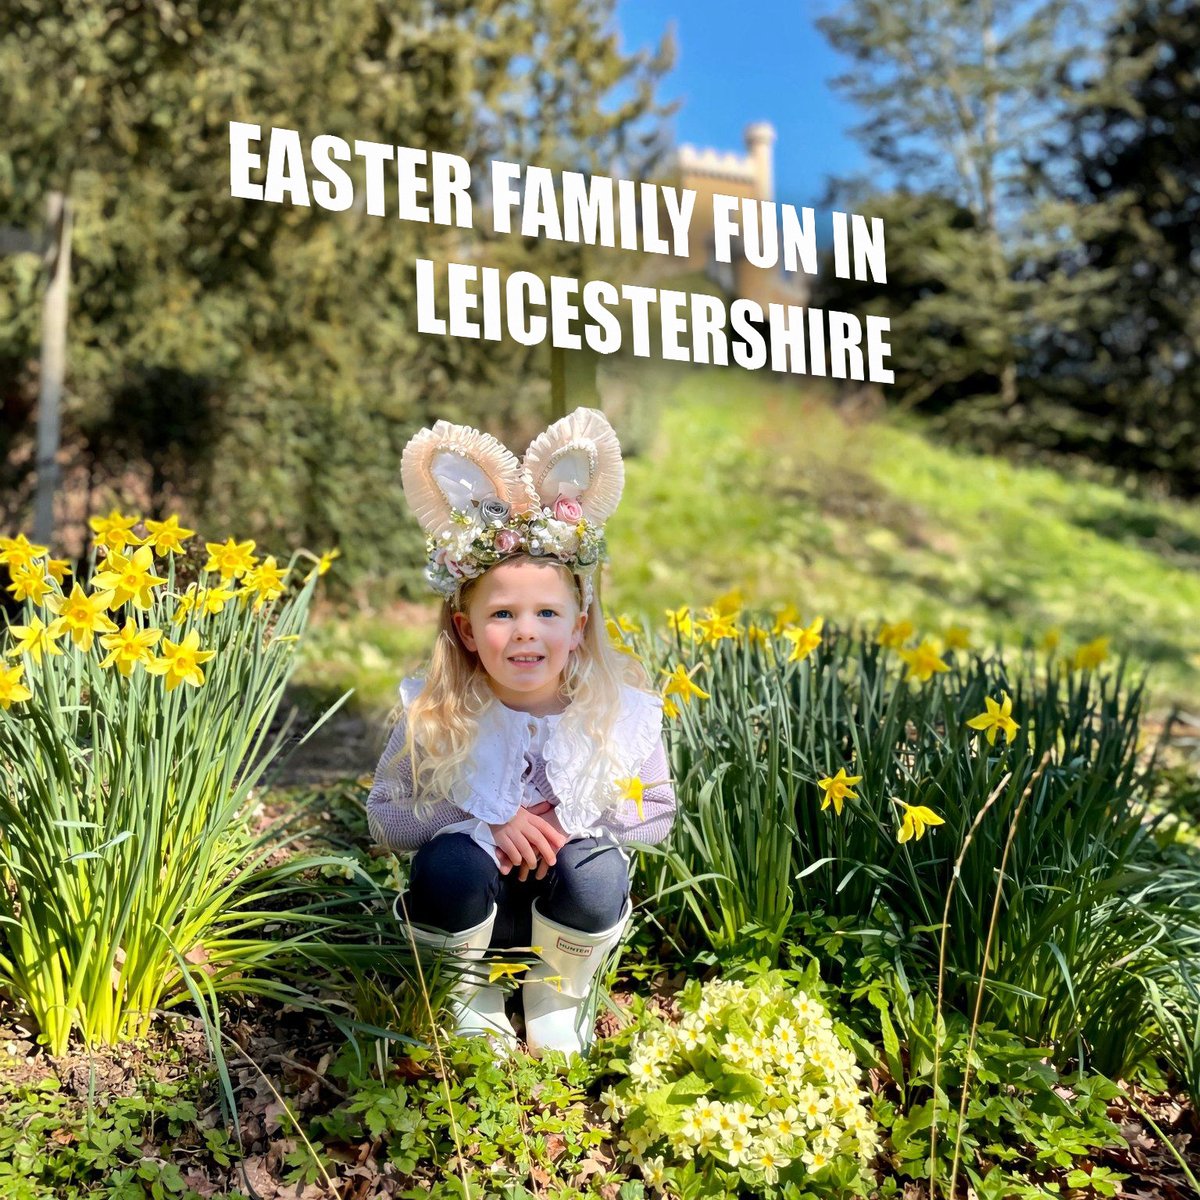 Yes, it's nearly the #EasterHolidays and there's loads happening around #leicestershire. Read our new blog showcasing some of the best things to do during the break. Credit for this ADORABLE picture goes to @belvoircastle ow.ly/7Xly50QT47R #holidays #daysoutwiththekids